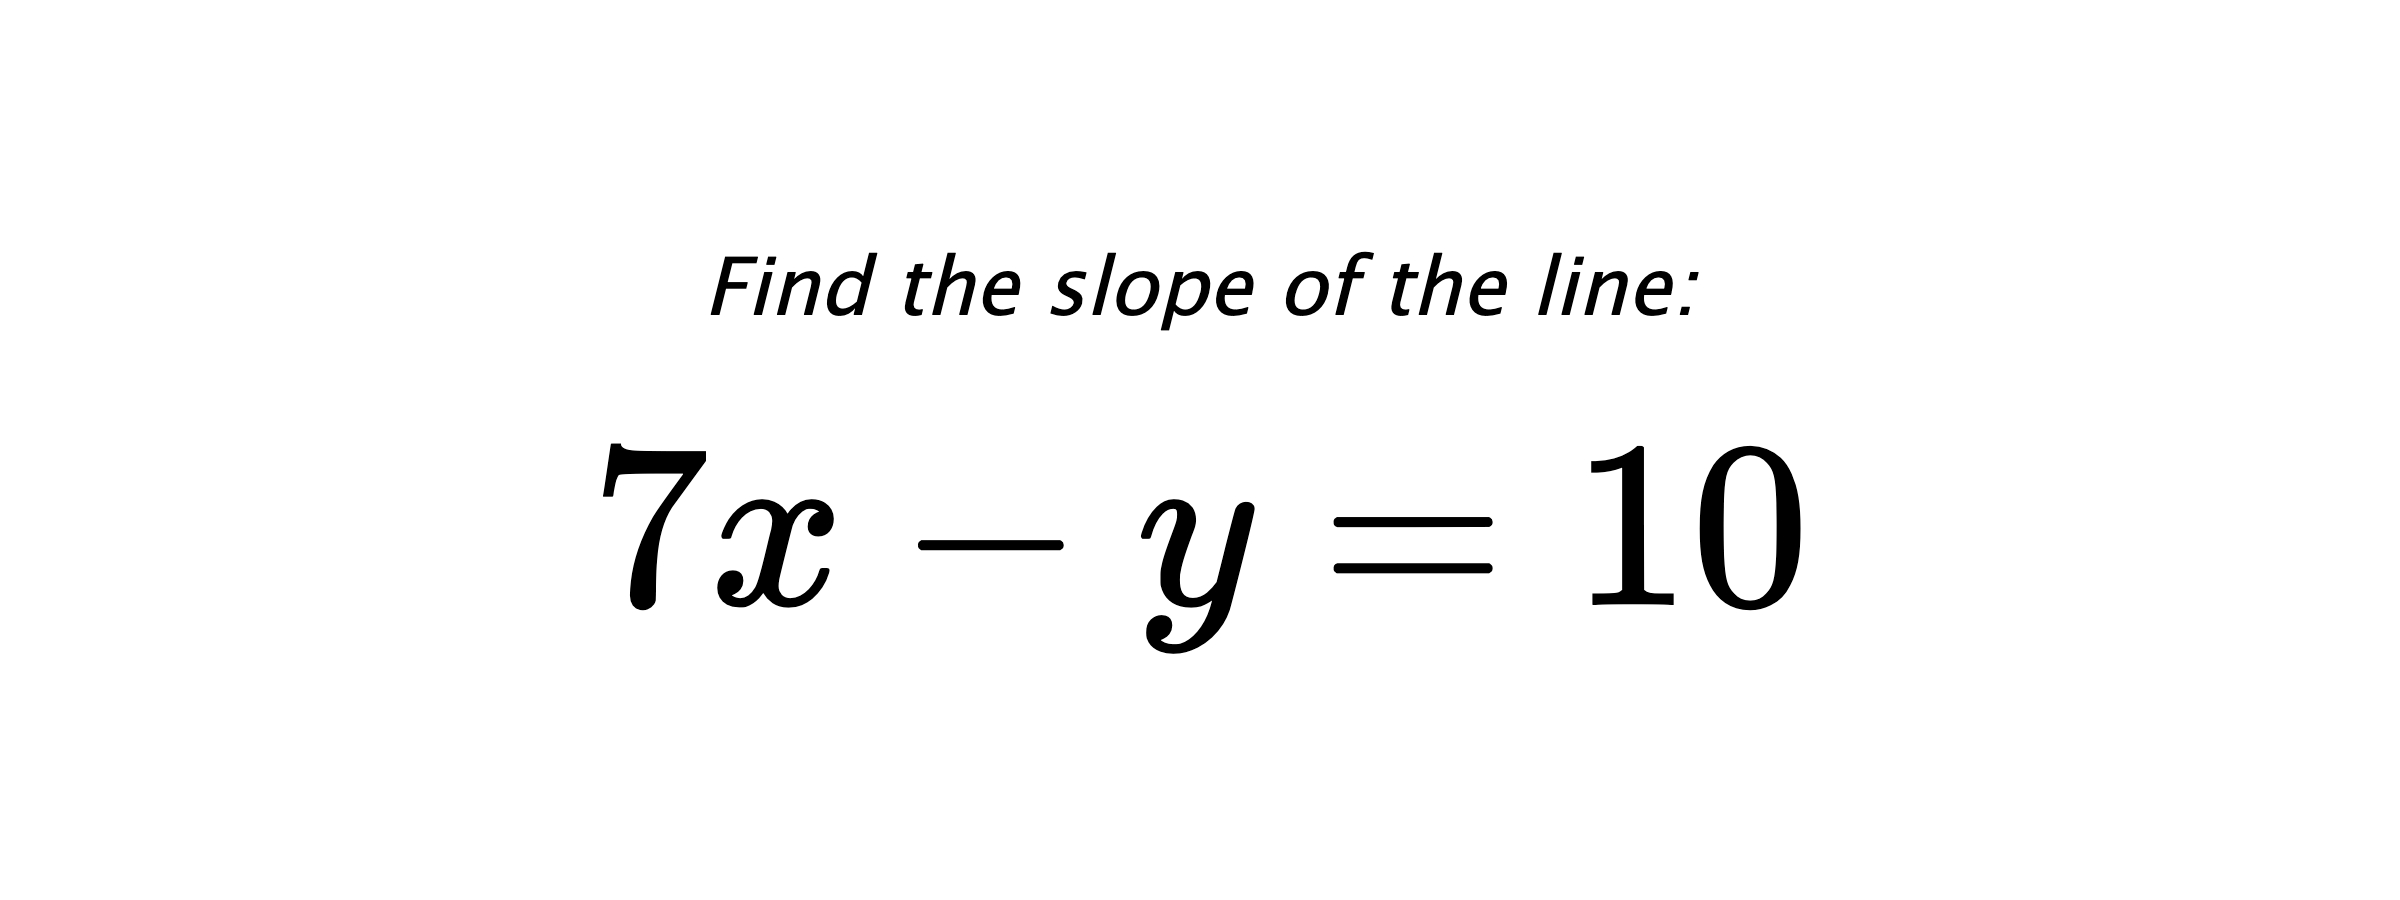 Find the slope of the line: $ 7x-y=10 $